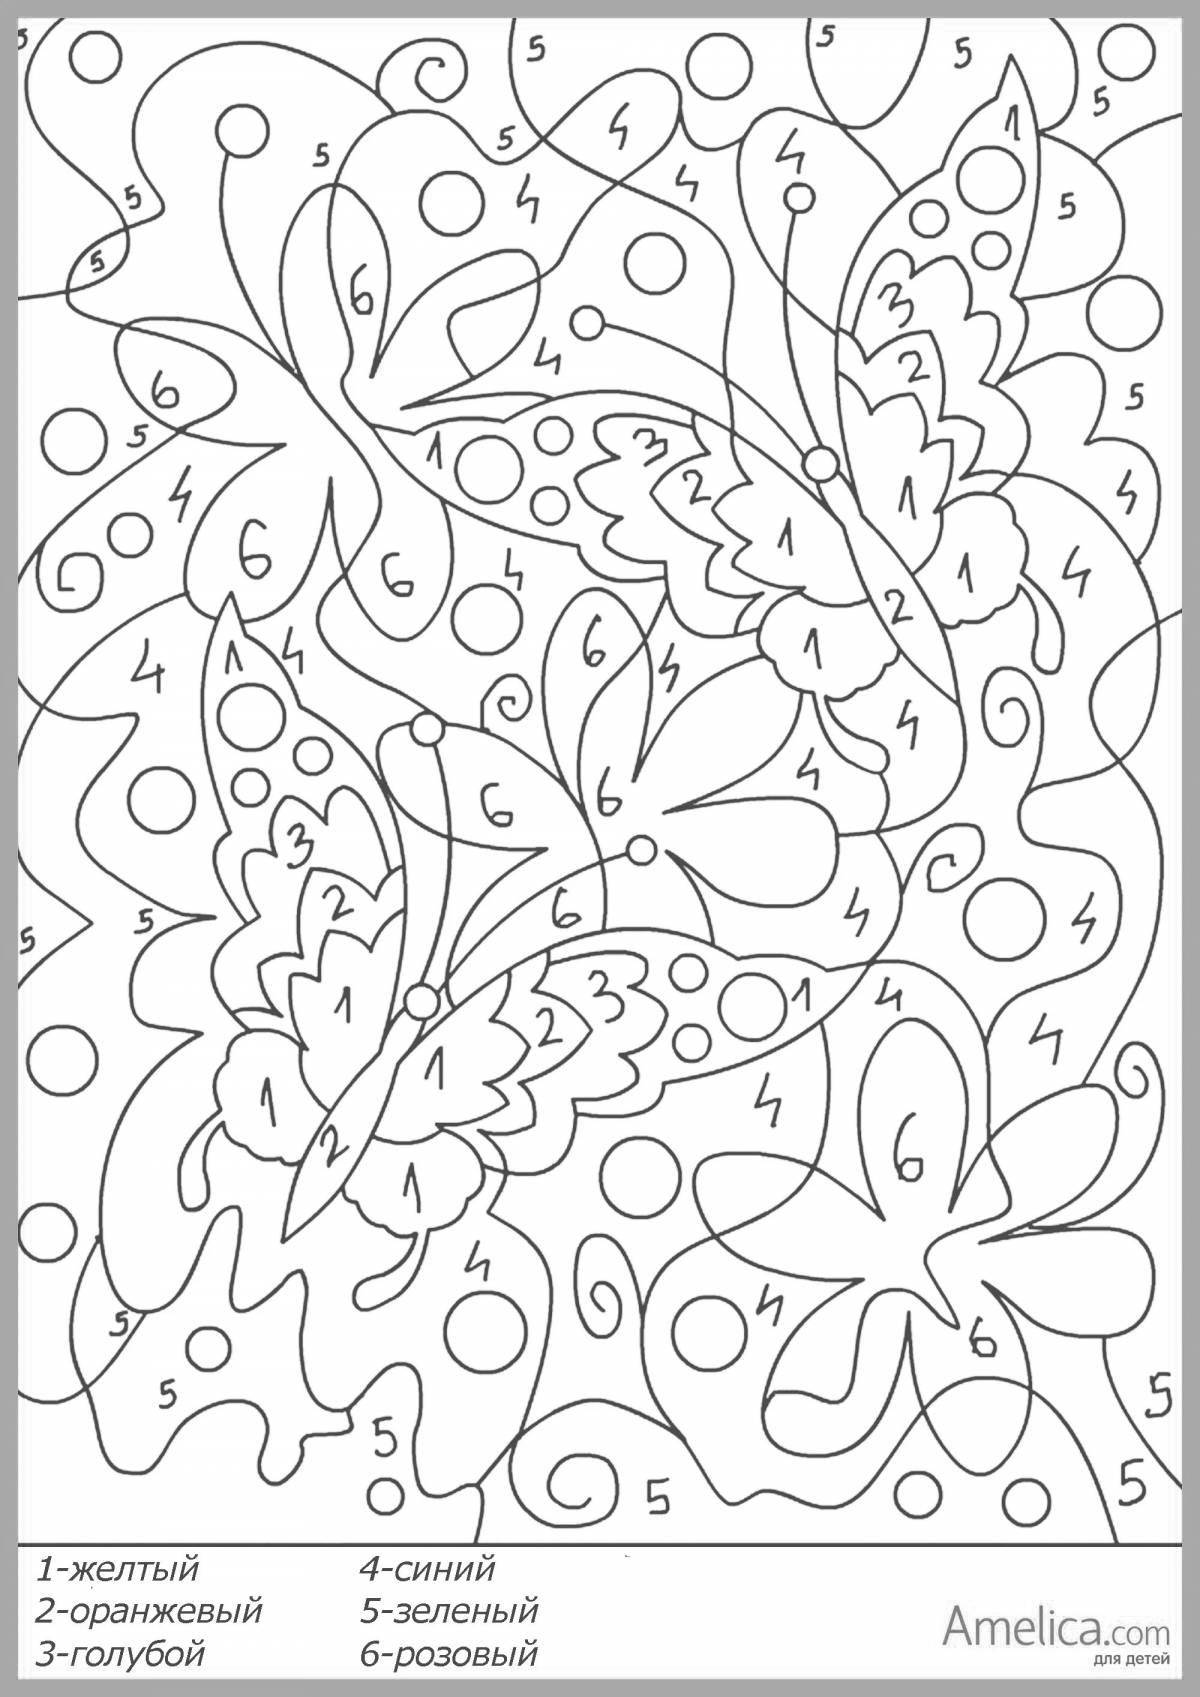 Stimulating coloring book for 7-8 year olds